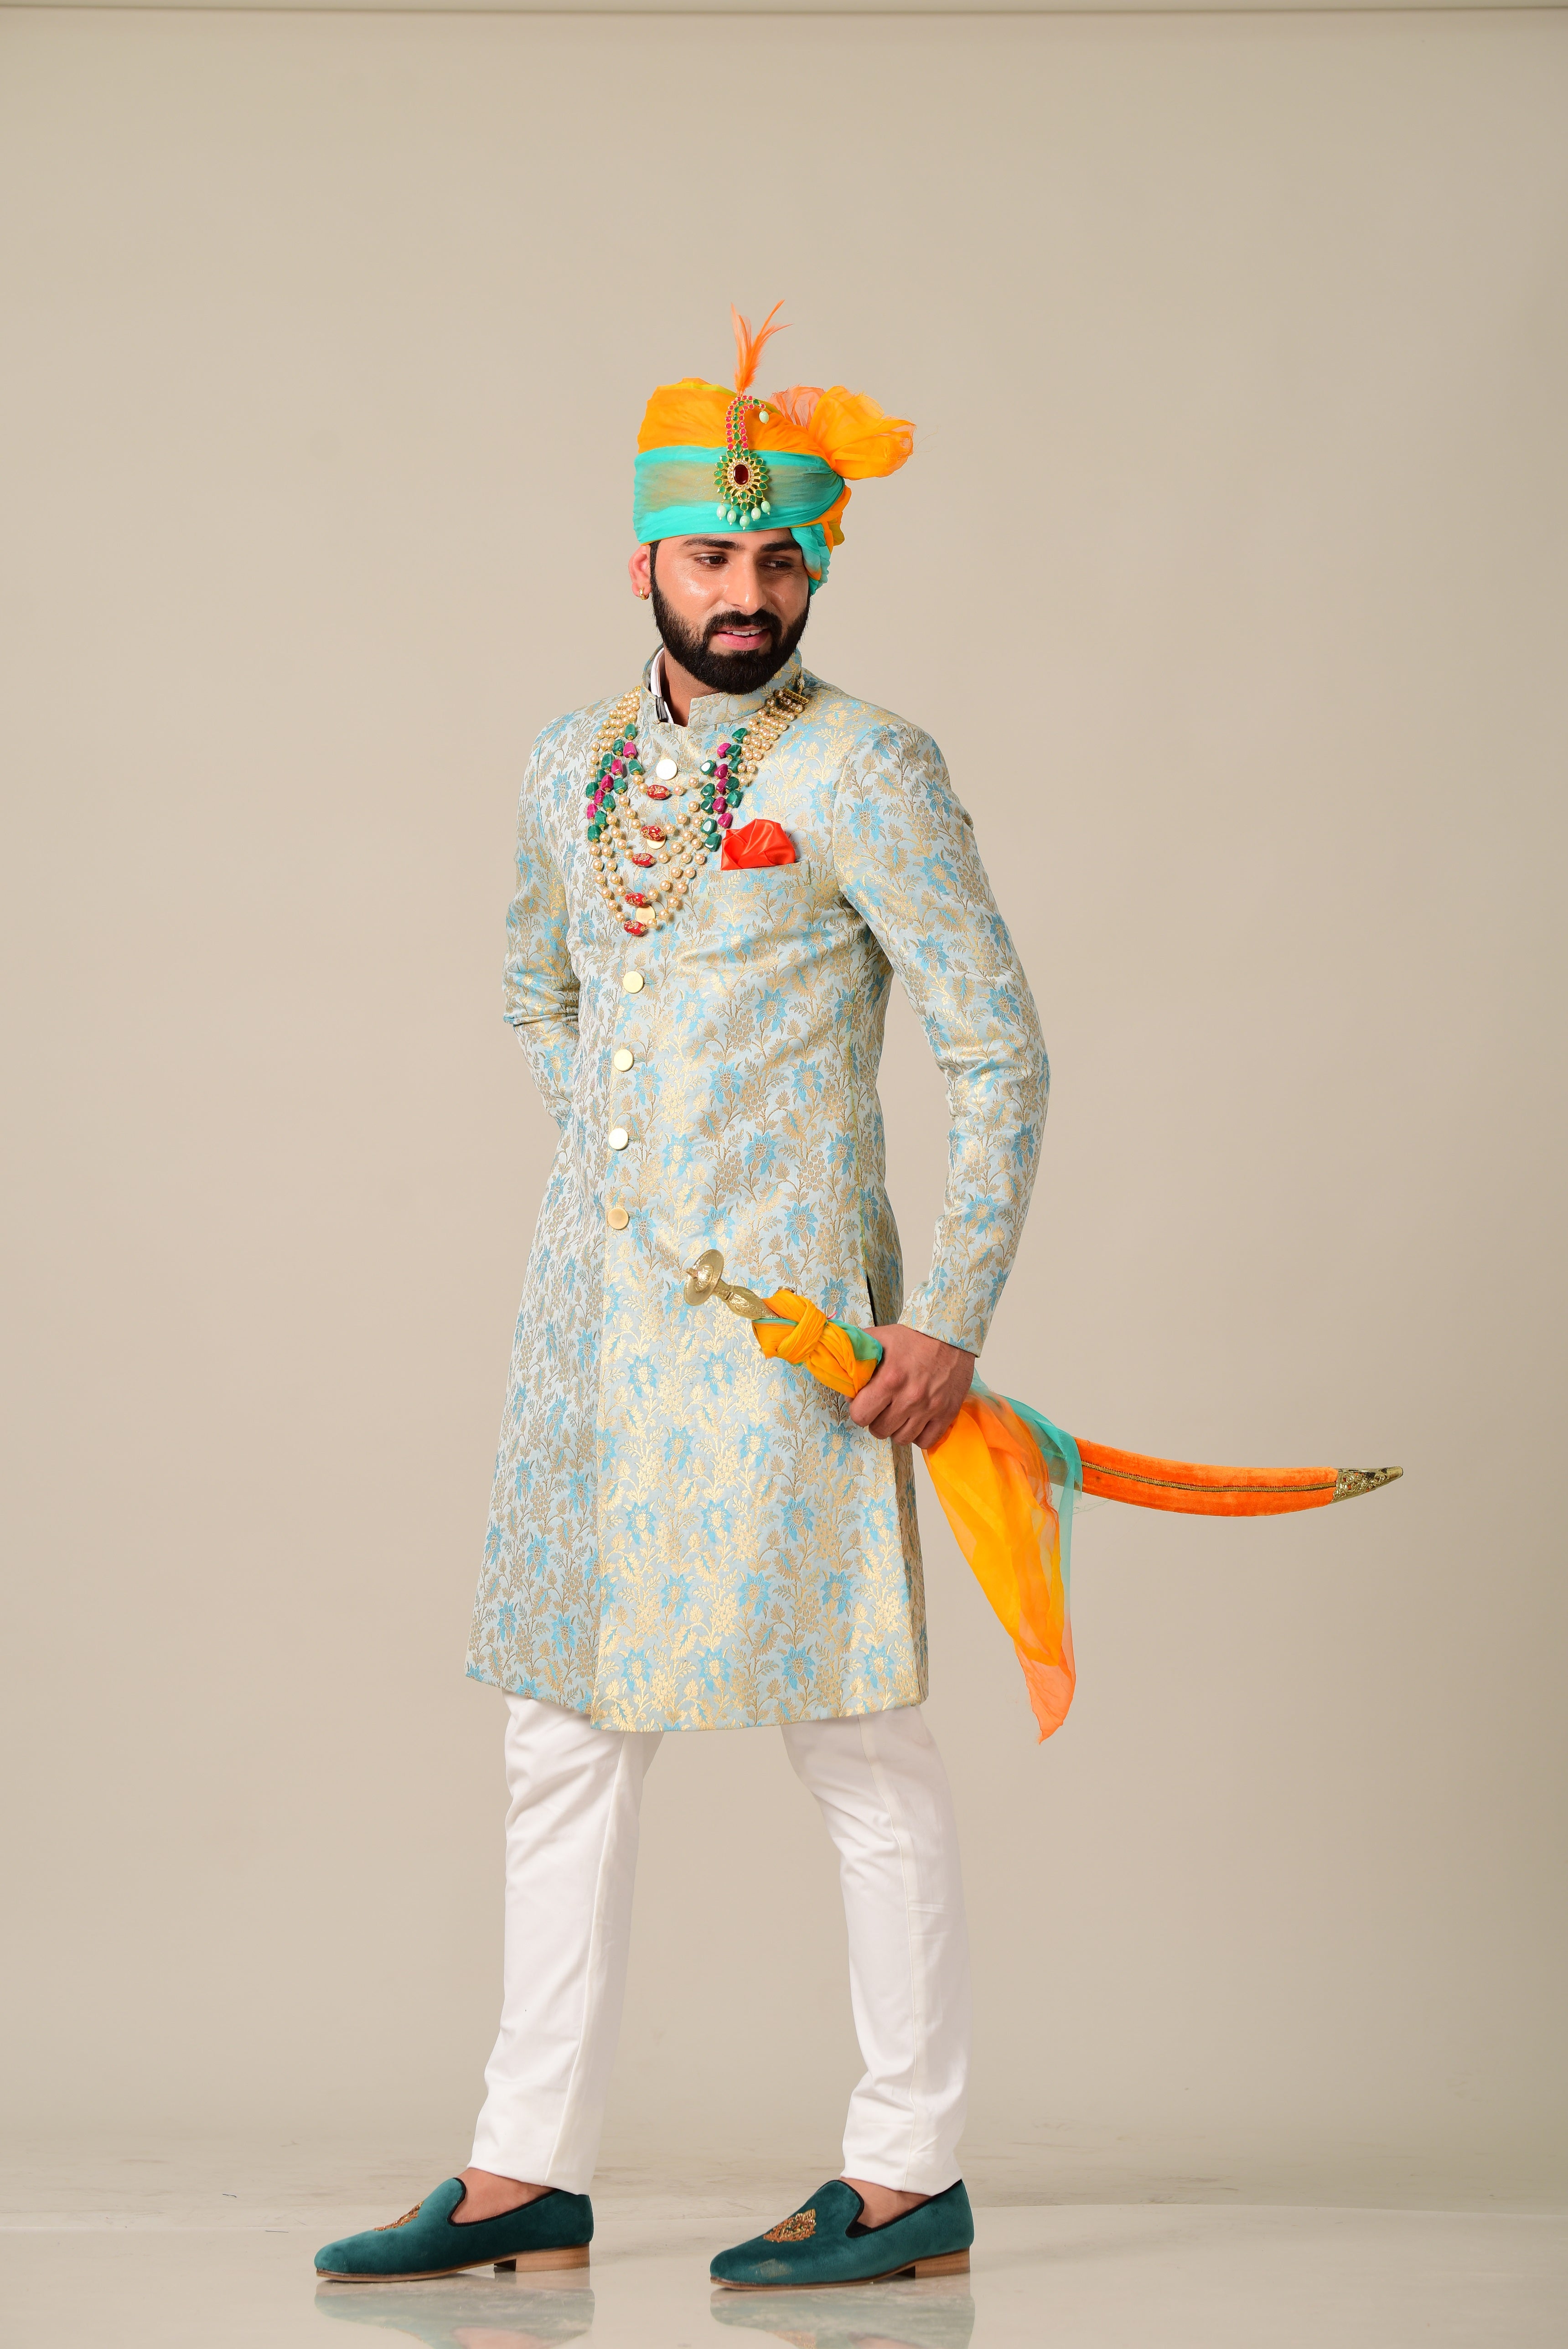 Dazzling Sky-Blue Hand-crafted Banarasi Brocade Sherwani /Achkan for Men | Traditional Wedding Style wear | Perfect for Family Weddings & Grooms